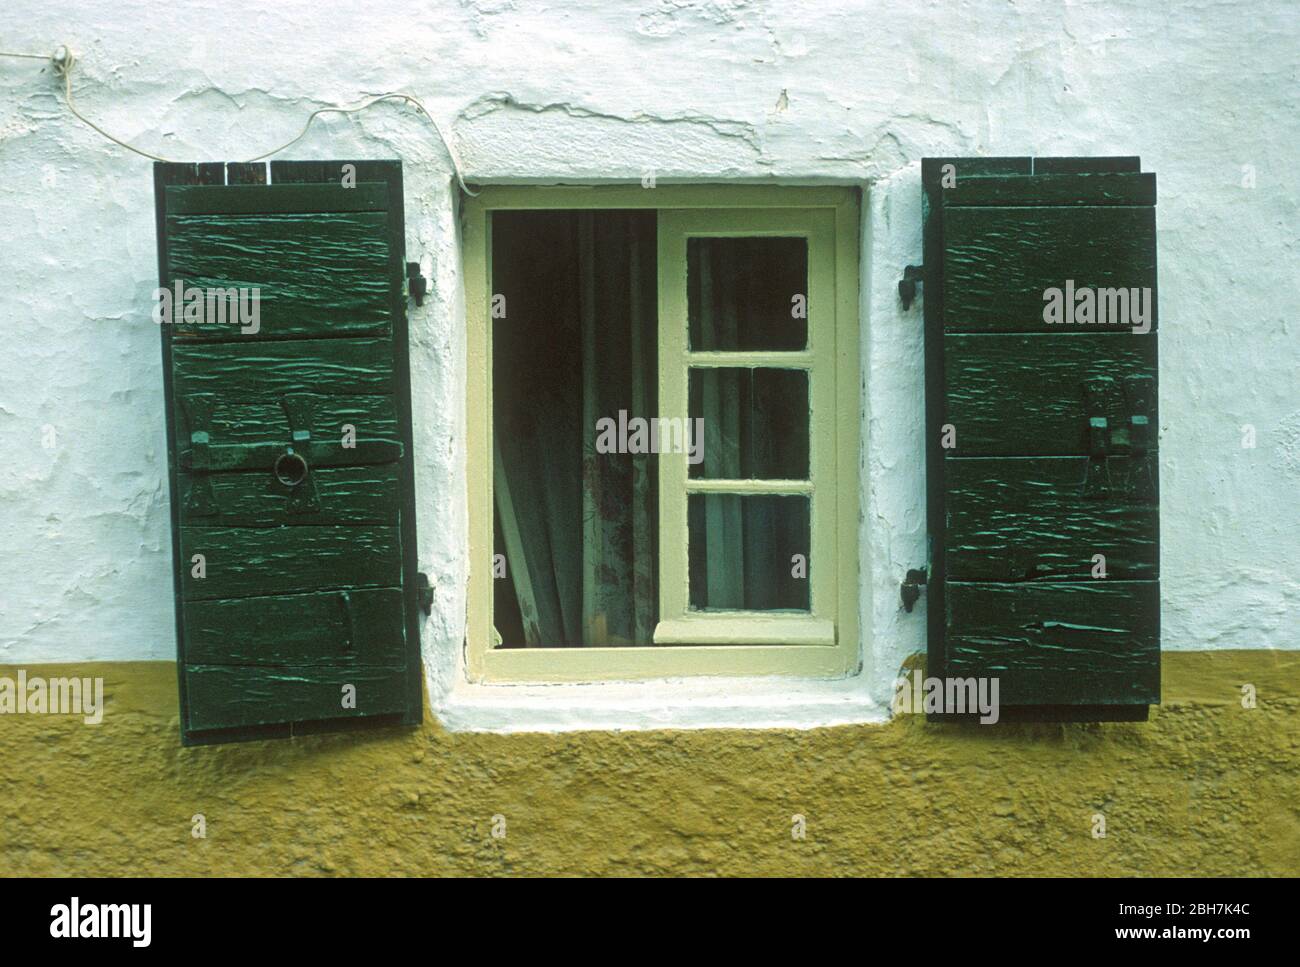 Dark green, wooden shutters folded back at the side of a lemon window in a yellow and white, painted wall in Paxos Island, Greece. See the other image where the shutters are closed. Stock Photo